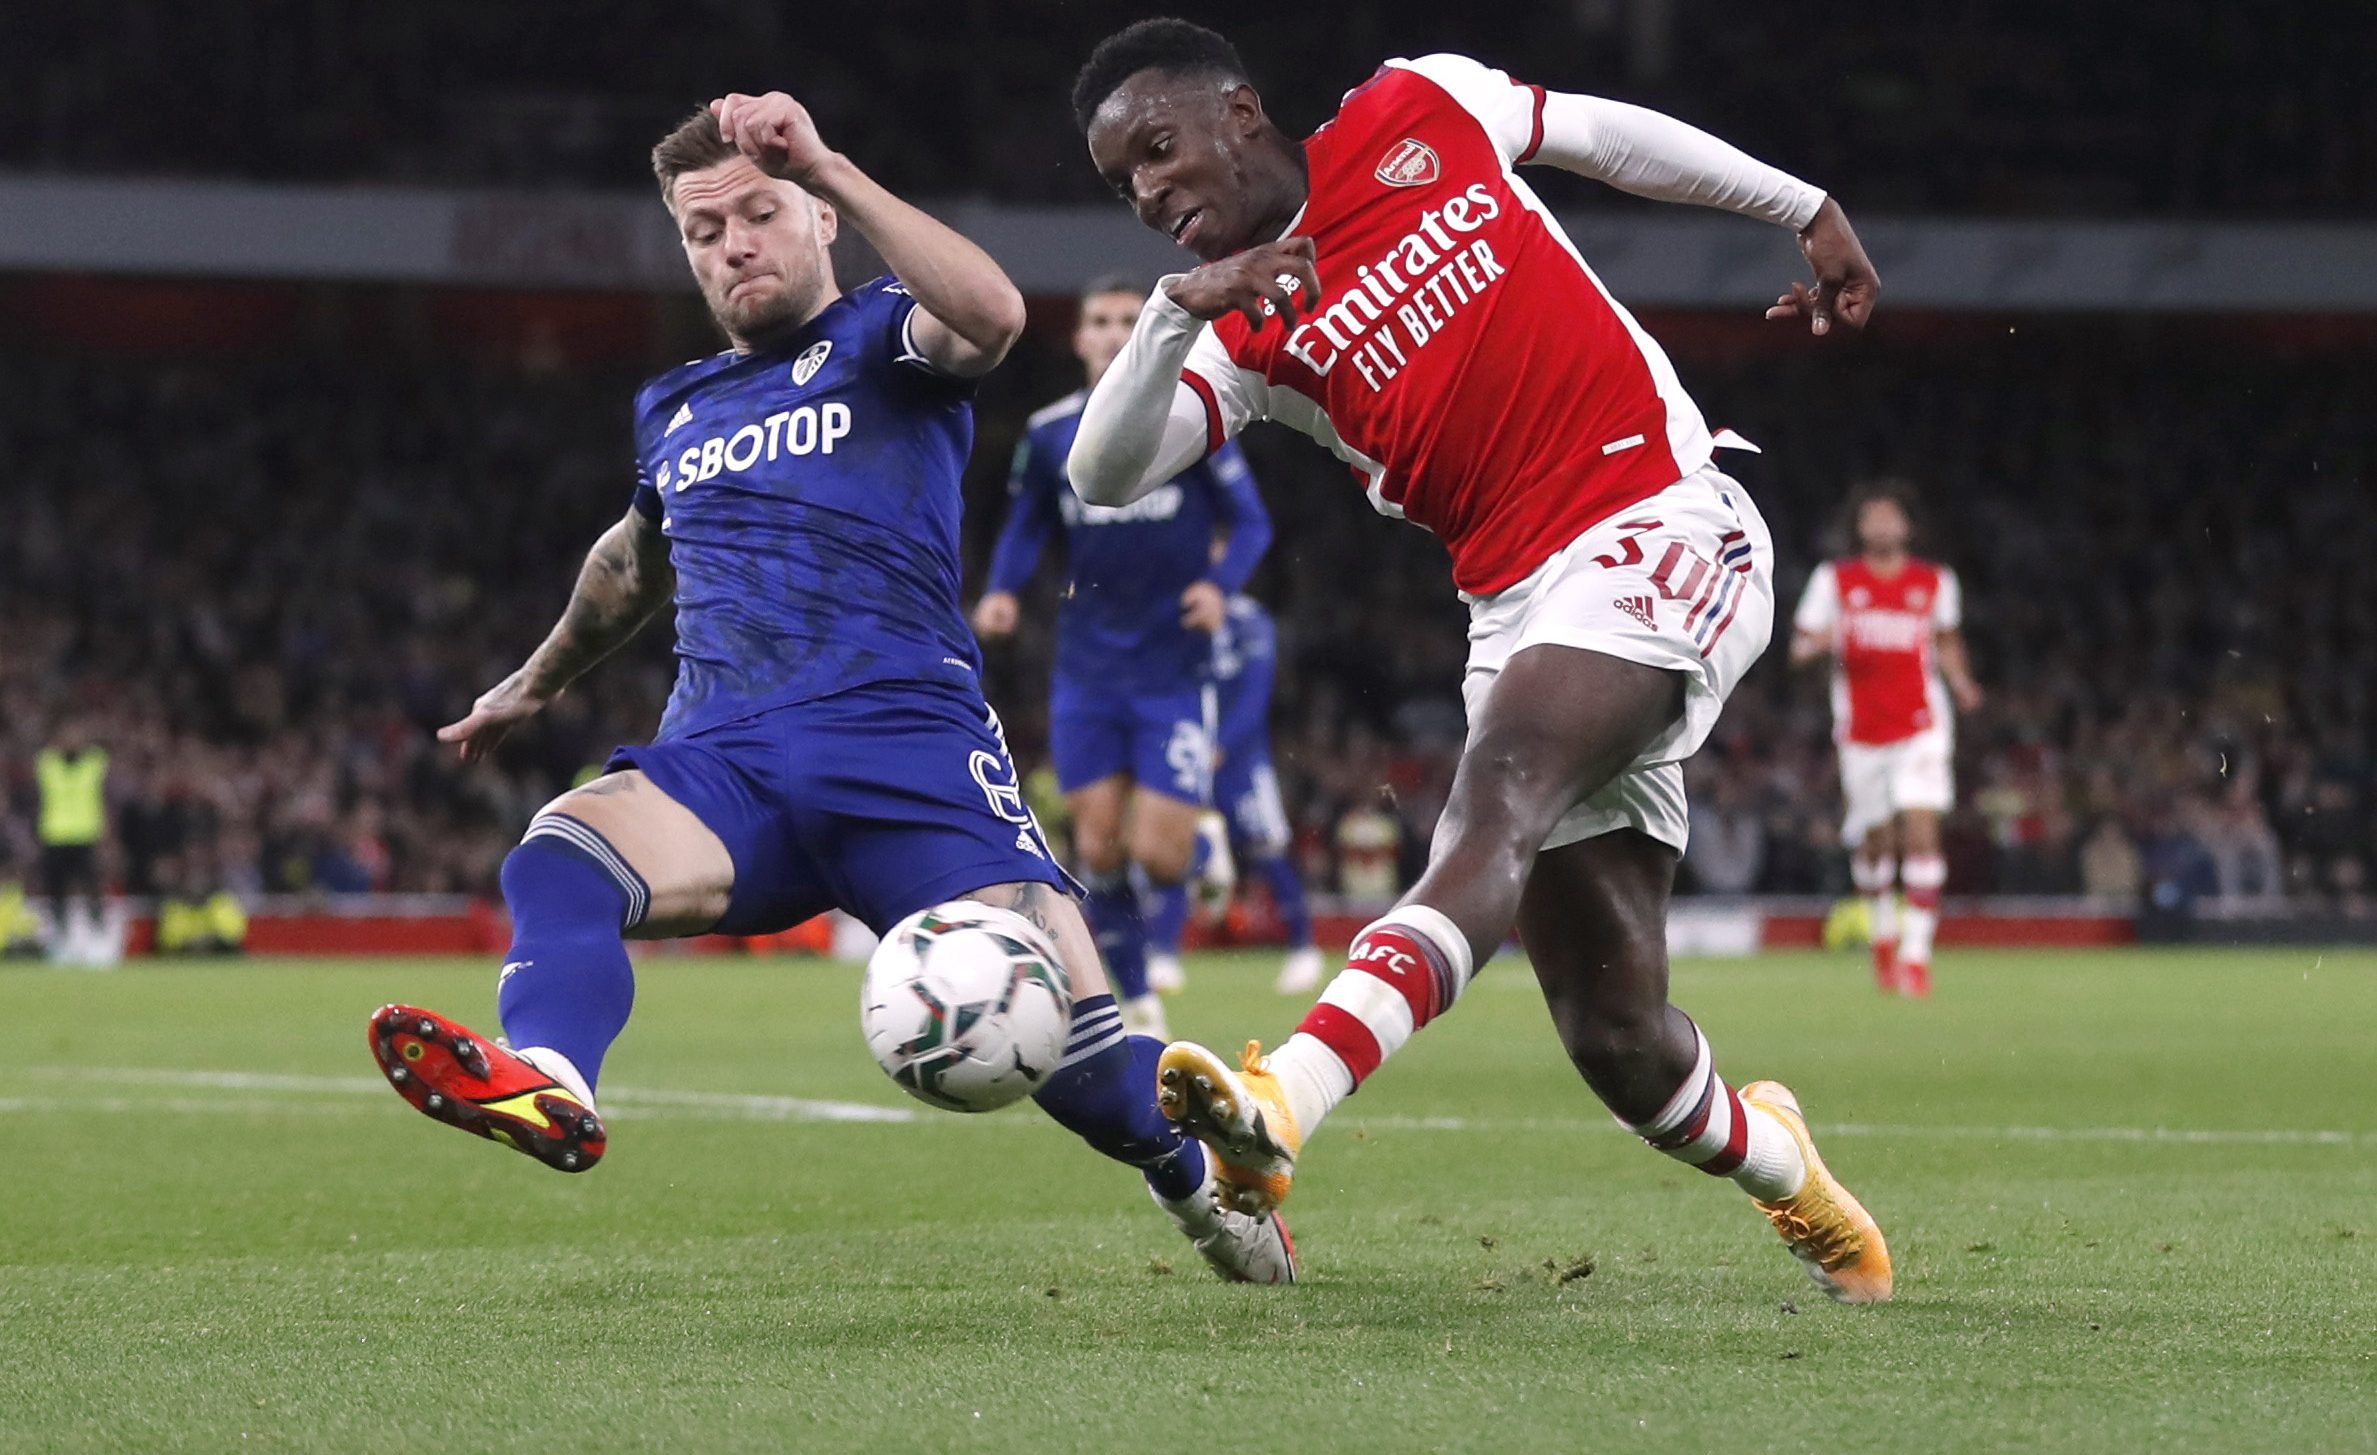 Soccer Football - Carabao Cup - Round of 16 - Arsenal v Leeds United - Emirates Stadium, London, Britain - October 26, 2021 Arsenal's Eddie Nketiah shoots at goal Action Images via Reuters/Matthew Childs EDITORIAL USE ONLY. No use with unauthorized audio, video, data, fixture lists, club/league logos or 'live' services. Online in-match use limited to 75 images, no video emulation. No use in betting, games or single club /league/player publications.  Please contact your account representative for